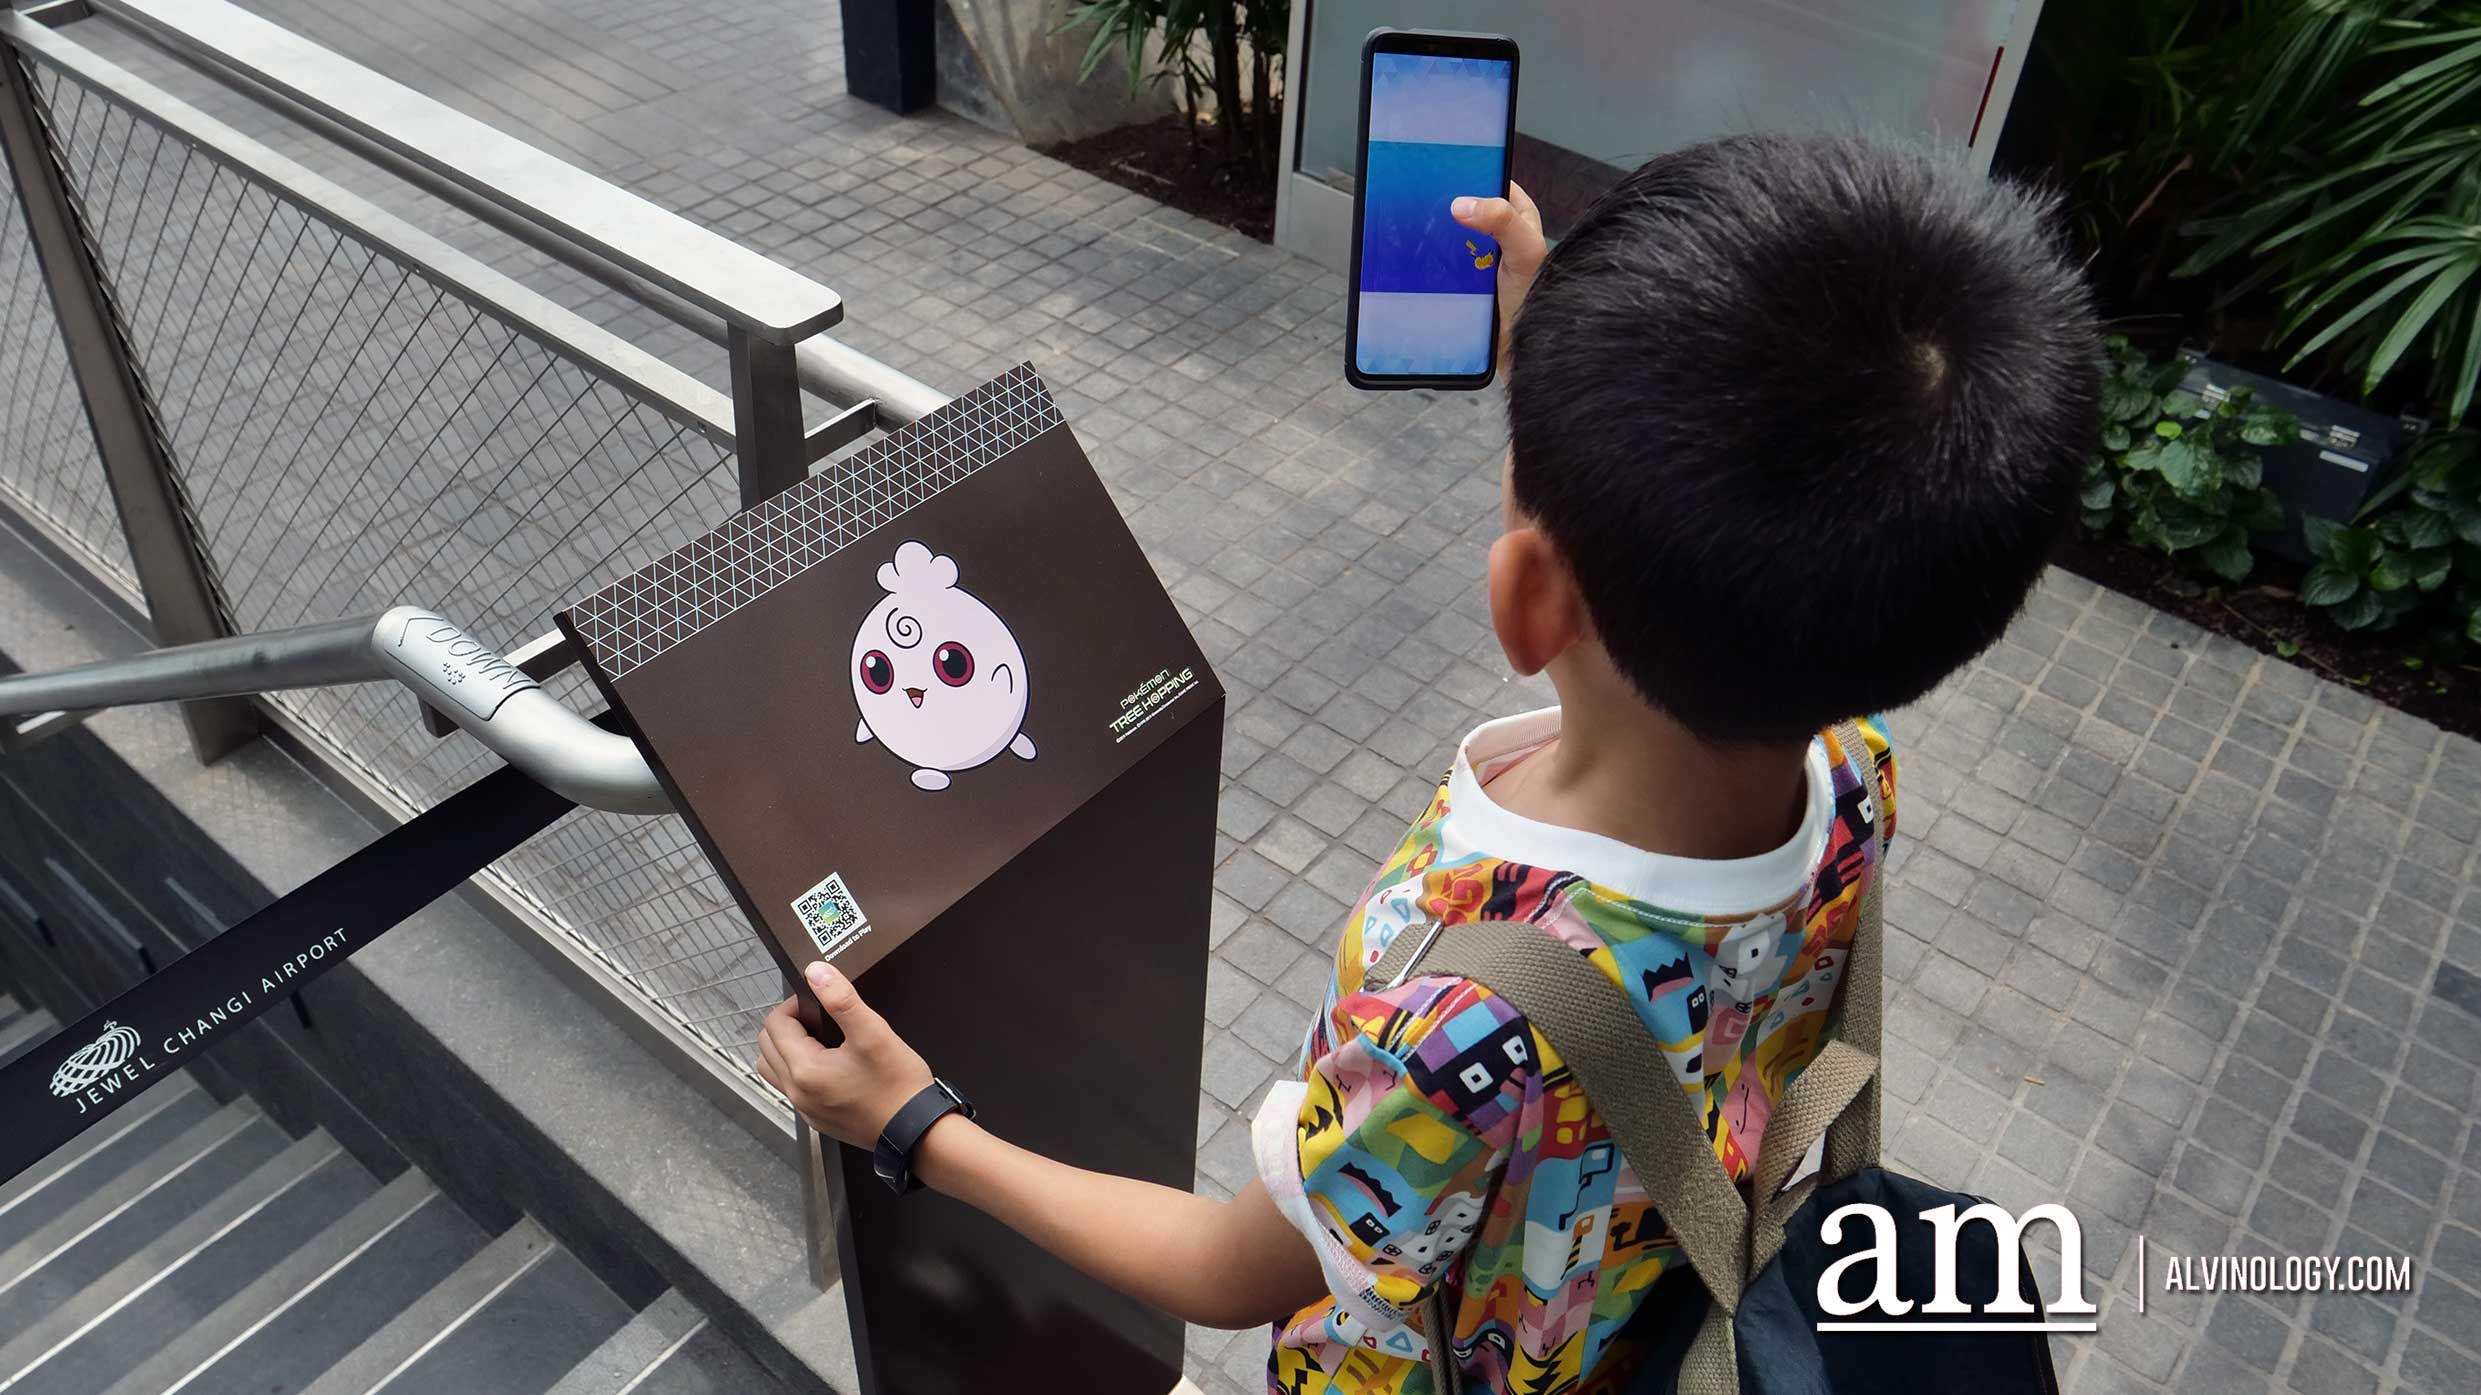 Do you know there's a "secret" Pokemon game in the Jewel Changi Airport app? - Alvinology